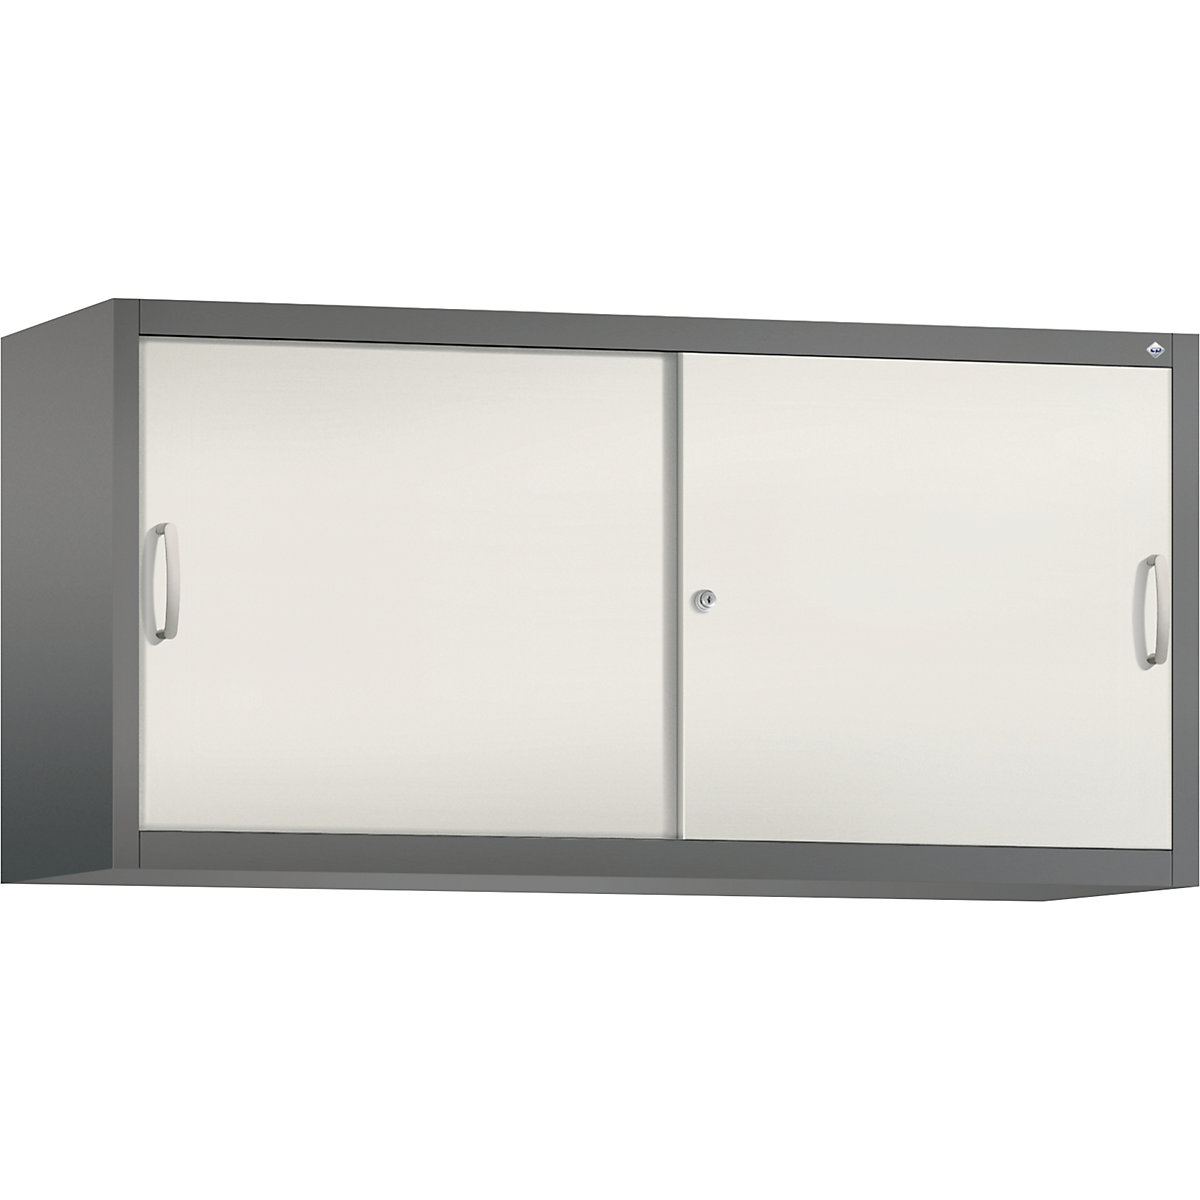 ACURADO add-on cupboard with sliding doors – C+P, 2 shelves, HxWxD 790 x 1600 x 500 mm, volcanic grey / oyster white-12